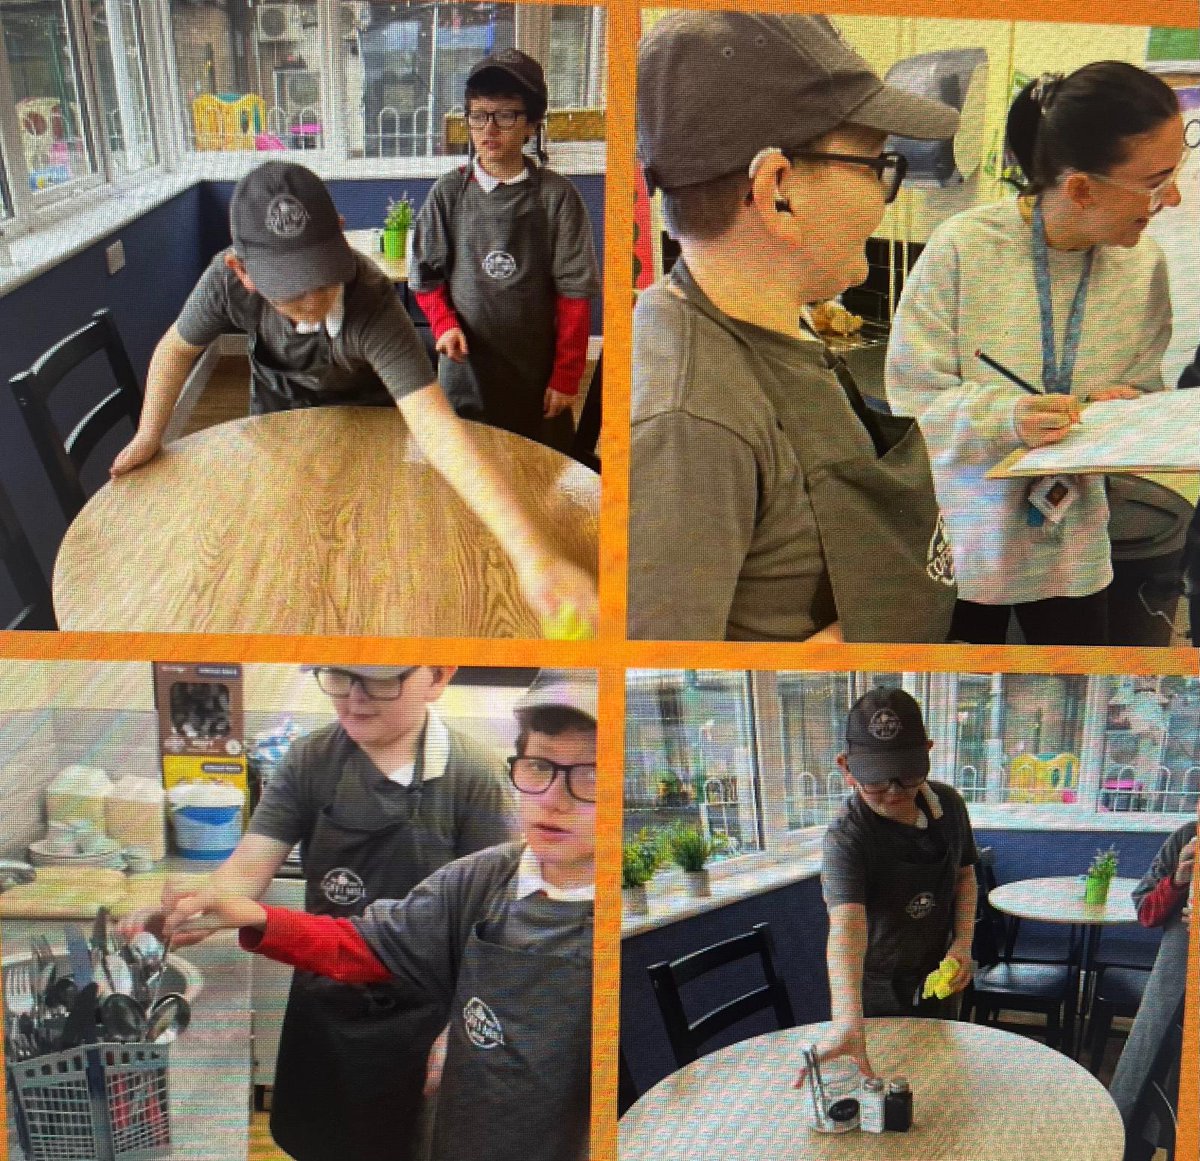 #yhfclass9 great work by DD today during his work experience at the Coffi Mill. He served customers, used the till, and prepared staff lunches 🤩 Well done✨️